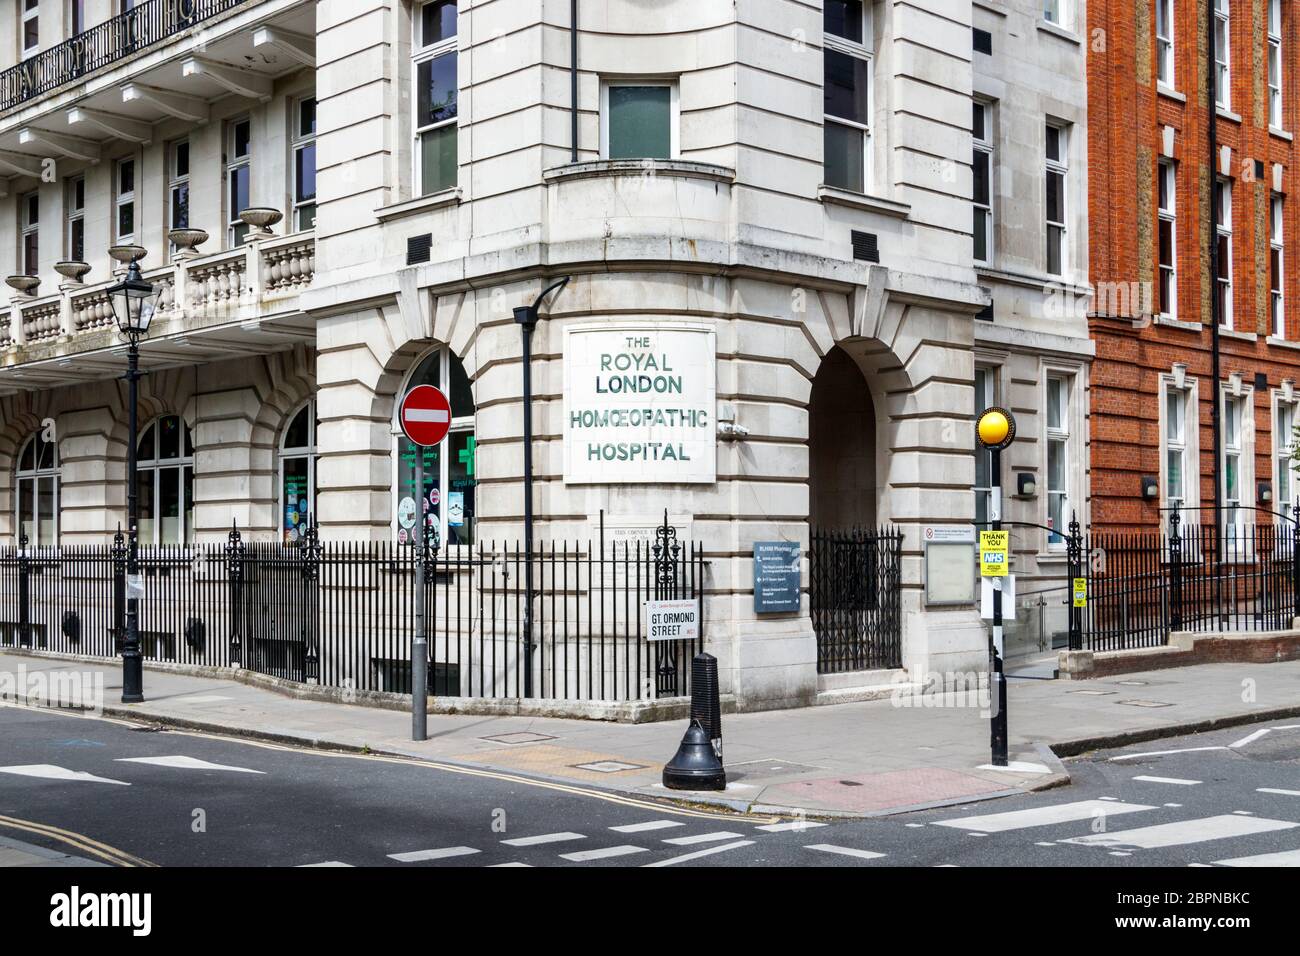 Le Royal London Hospital for Integrated Medicine (anciennement le Royal London Homoeopathic Hospital), Great Ormond Street, Londres, Royaume-Uni Banque D'Images